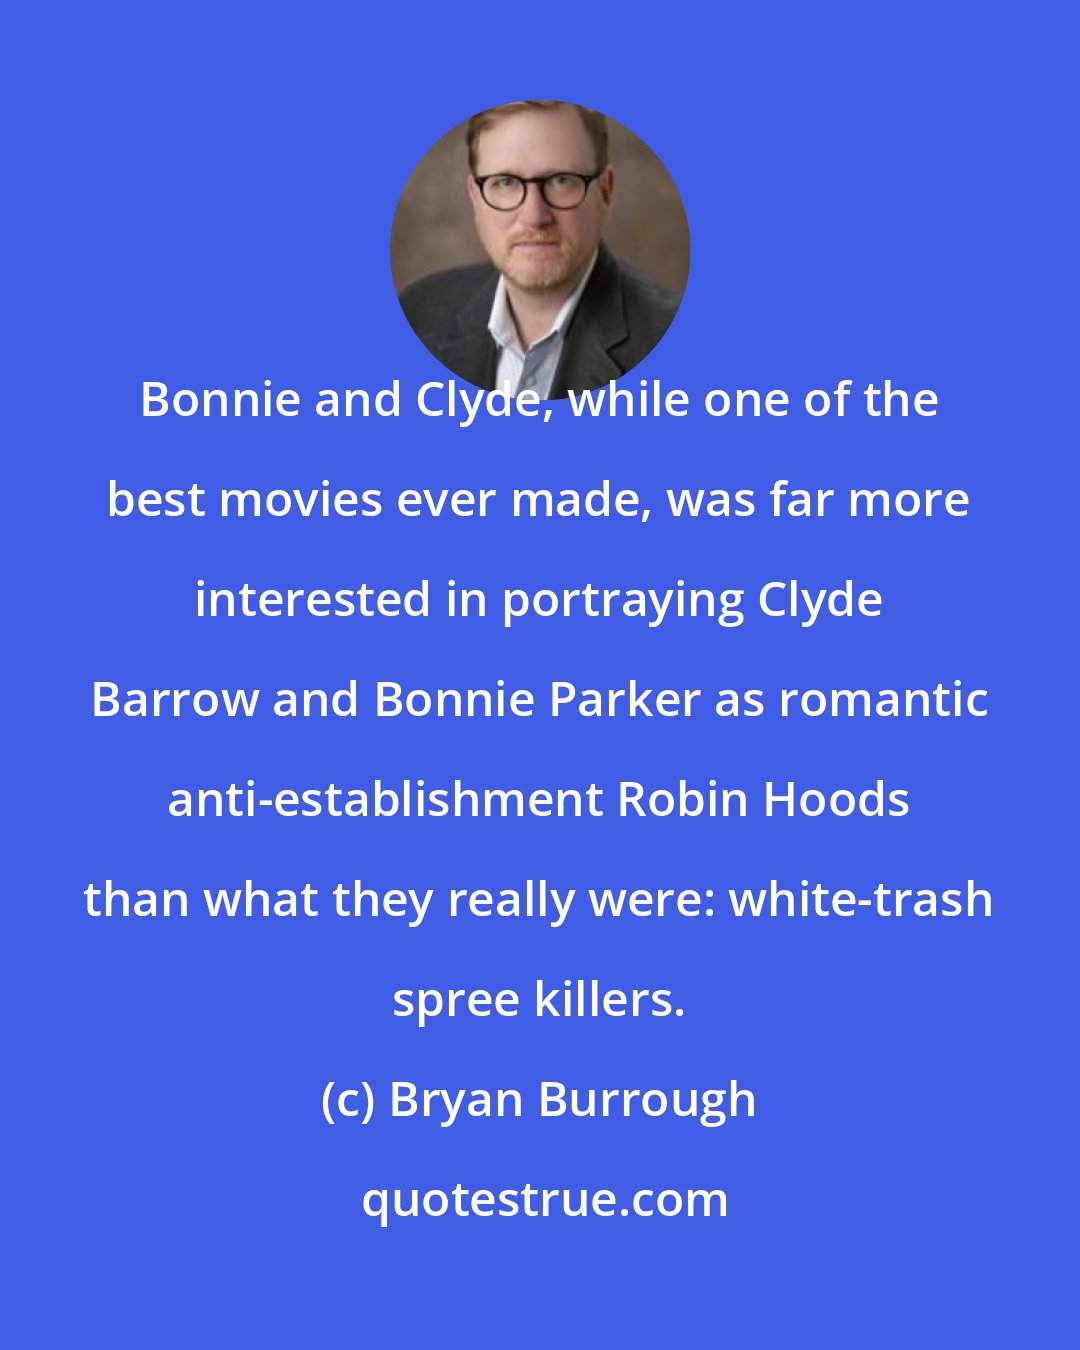 Bryan Burrough: Bonnie and Clyde, while one of the best movies ever made, was far more interested in portraying Clyde Barrow and Bonnie Parker as romantic anti-establishment Robin Hoods than what they really were: white-trash spree killers.